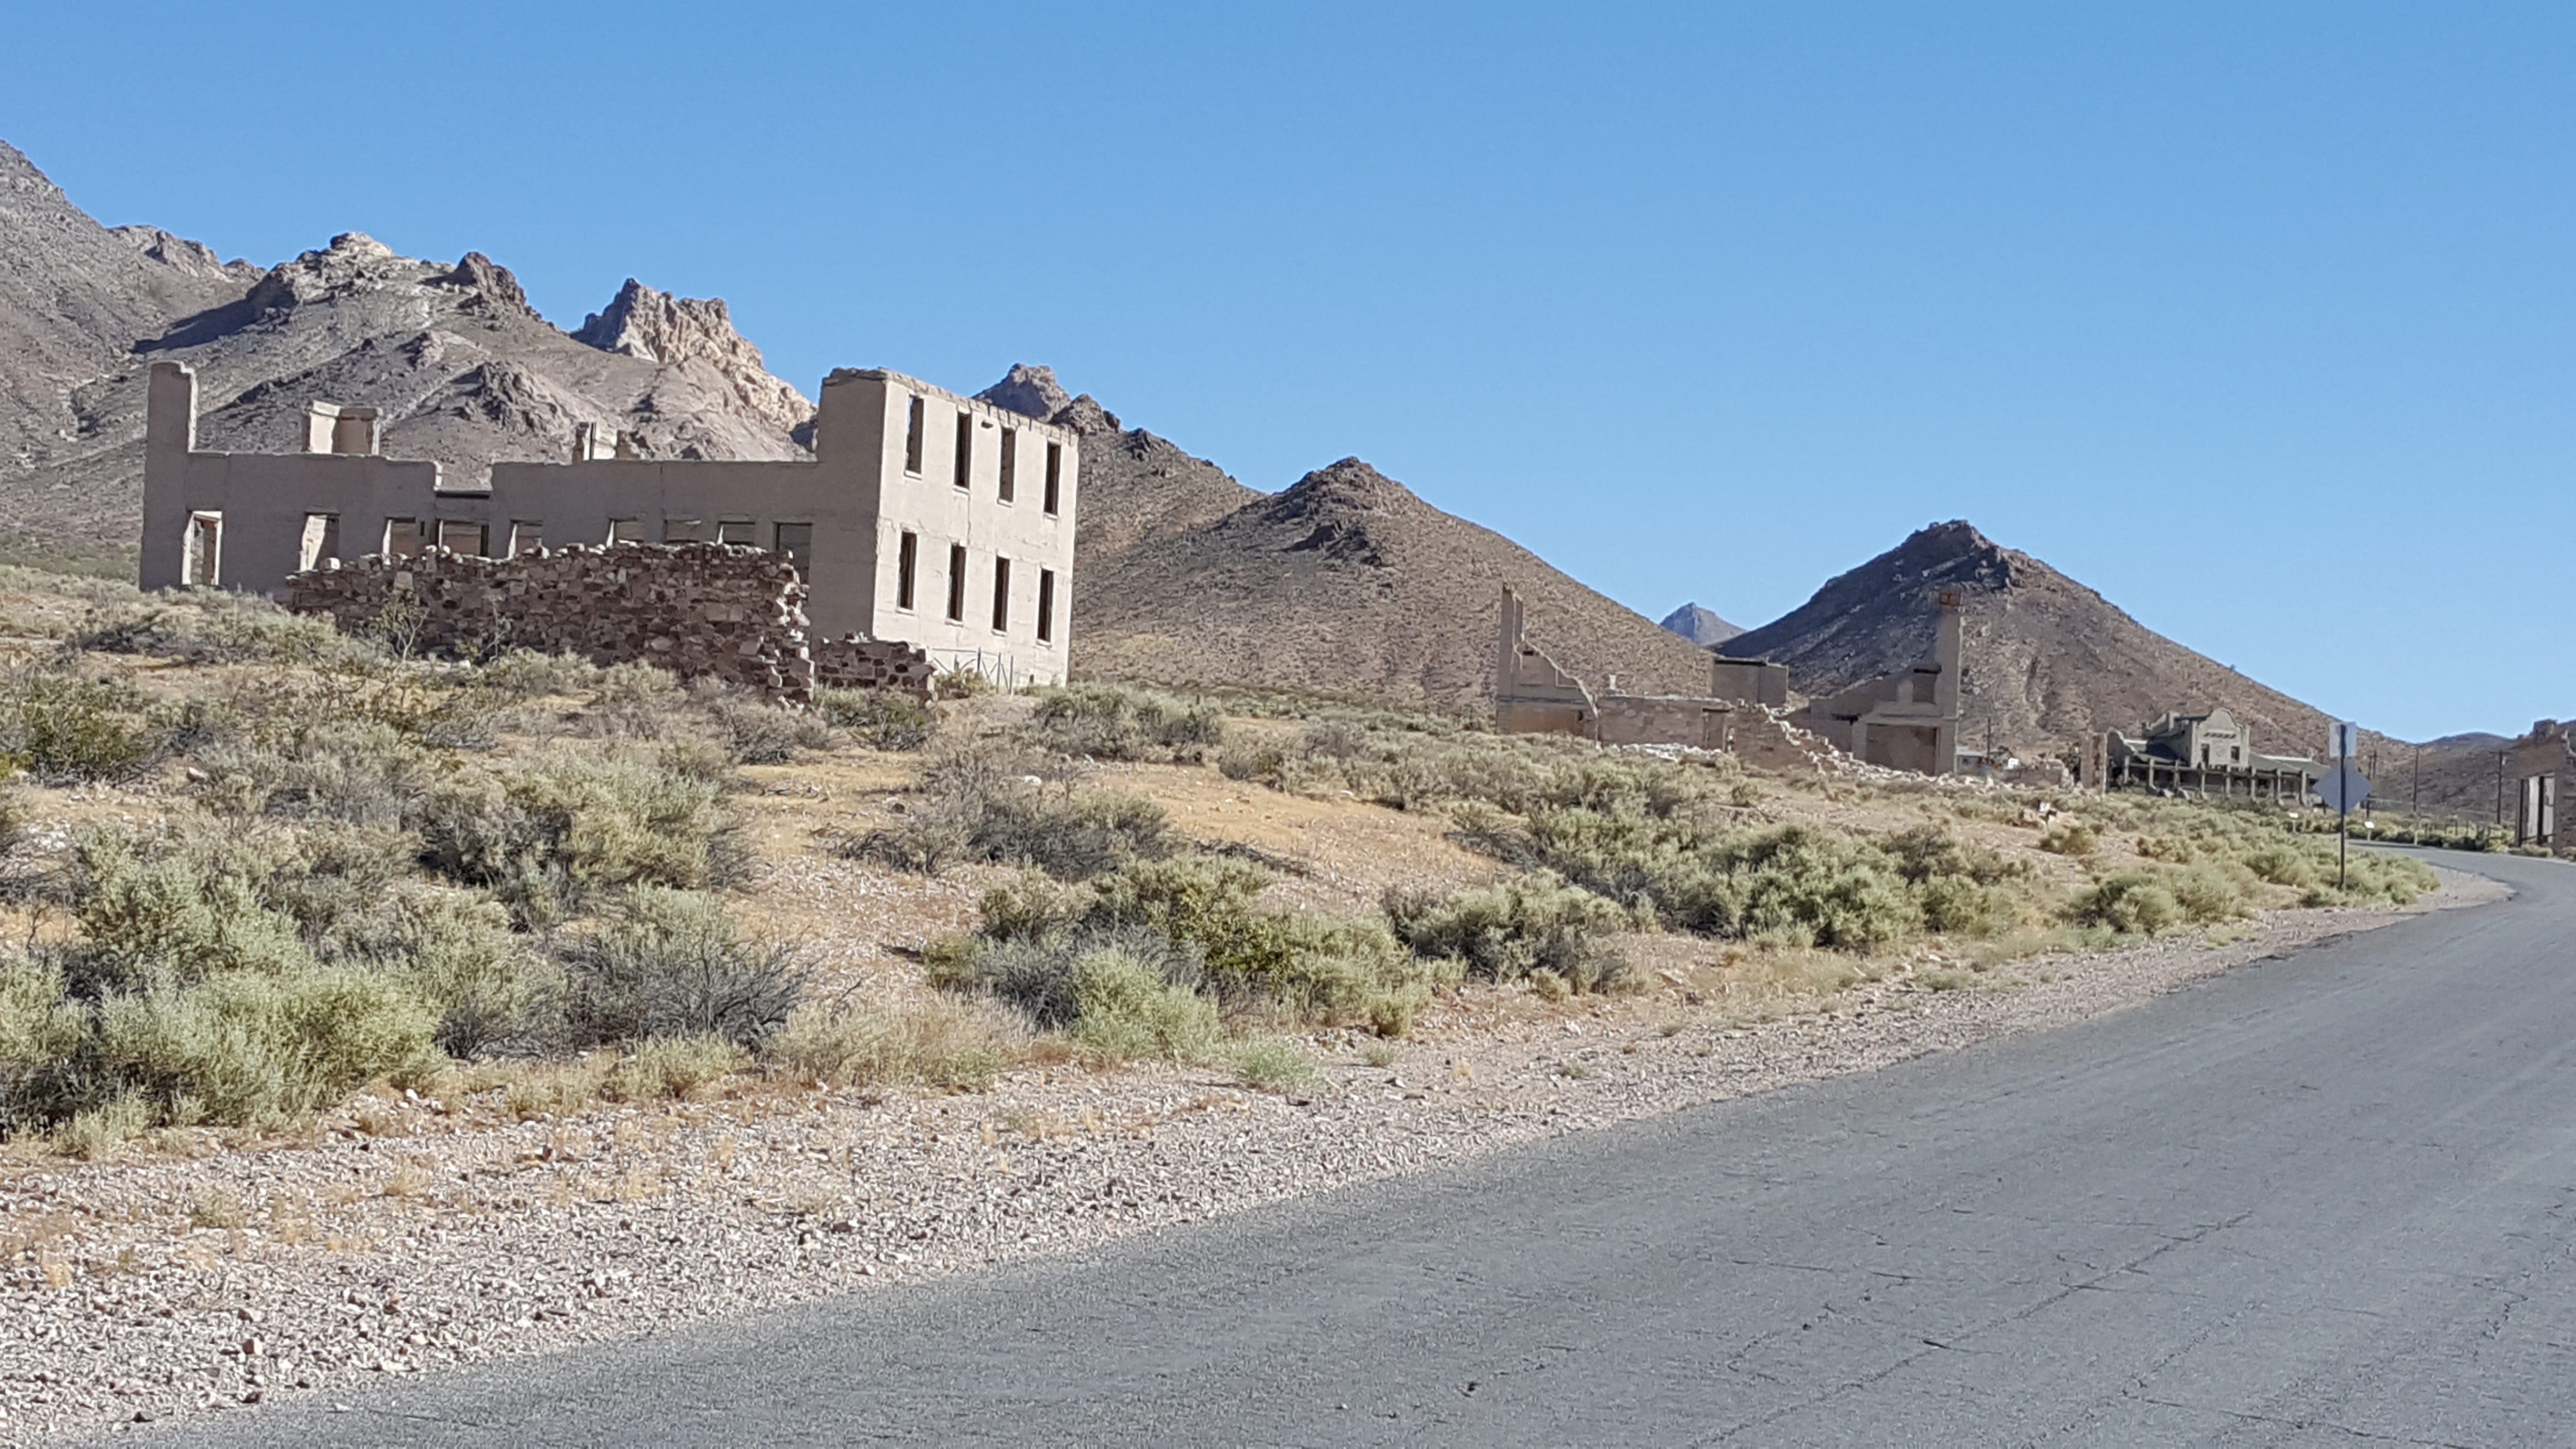 Some of the many ruins at Rhyolite ghost town